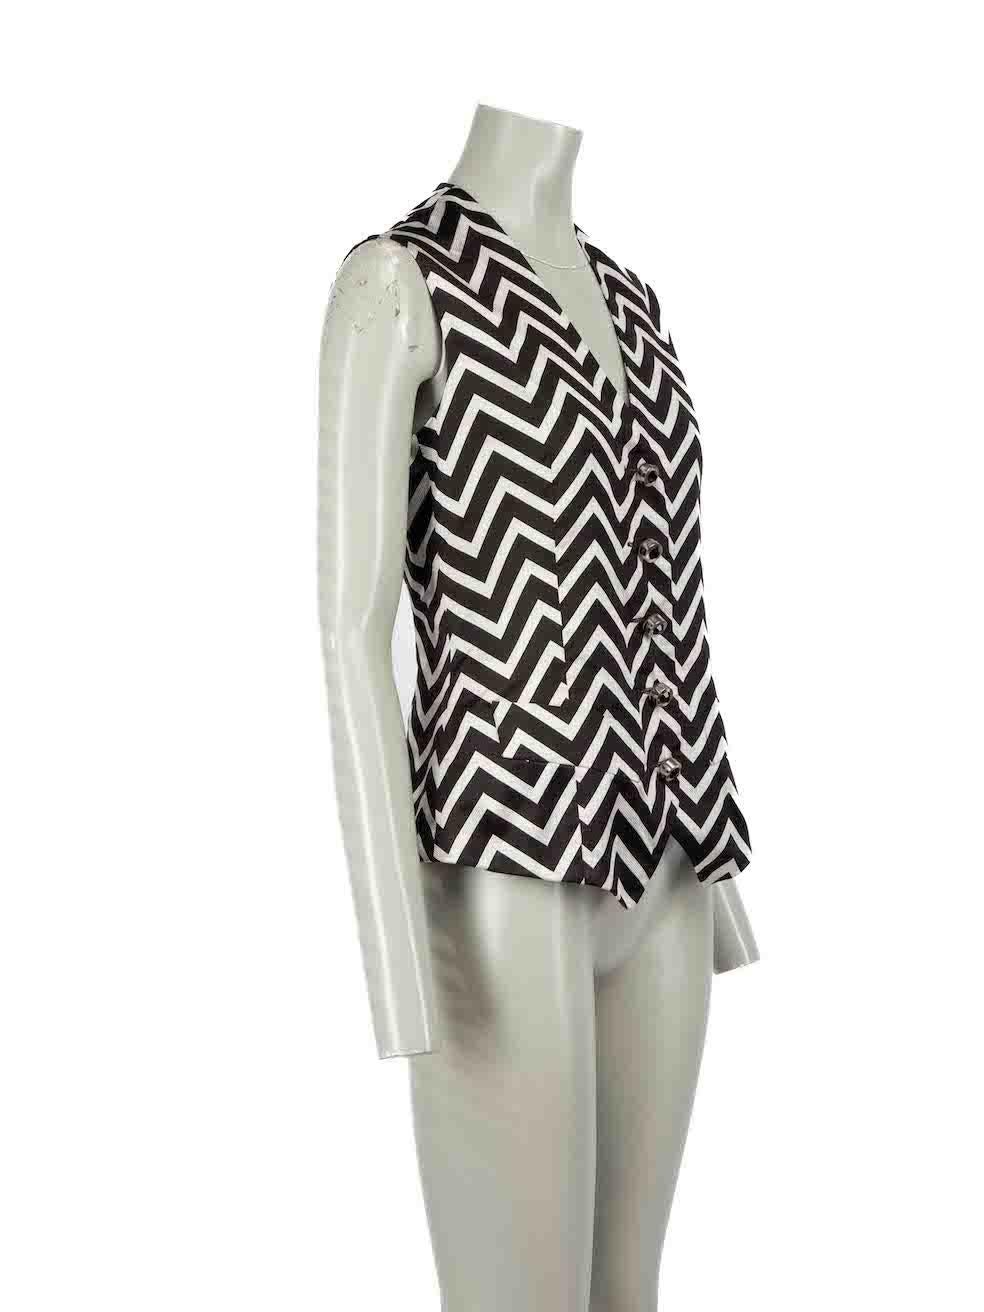 CONDITION is Very good. Hardly any visible wear to waistcoat is evident on this used Gianfranco Ferré designer resale item.
 
Details
Vintage
Black and white
Waistcoat
Zigzag jacquard pattern
Button up fastening
 
Made in Italy
 
Composition
100%